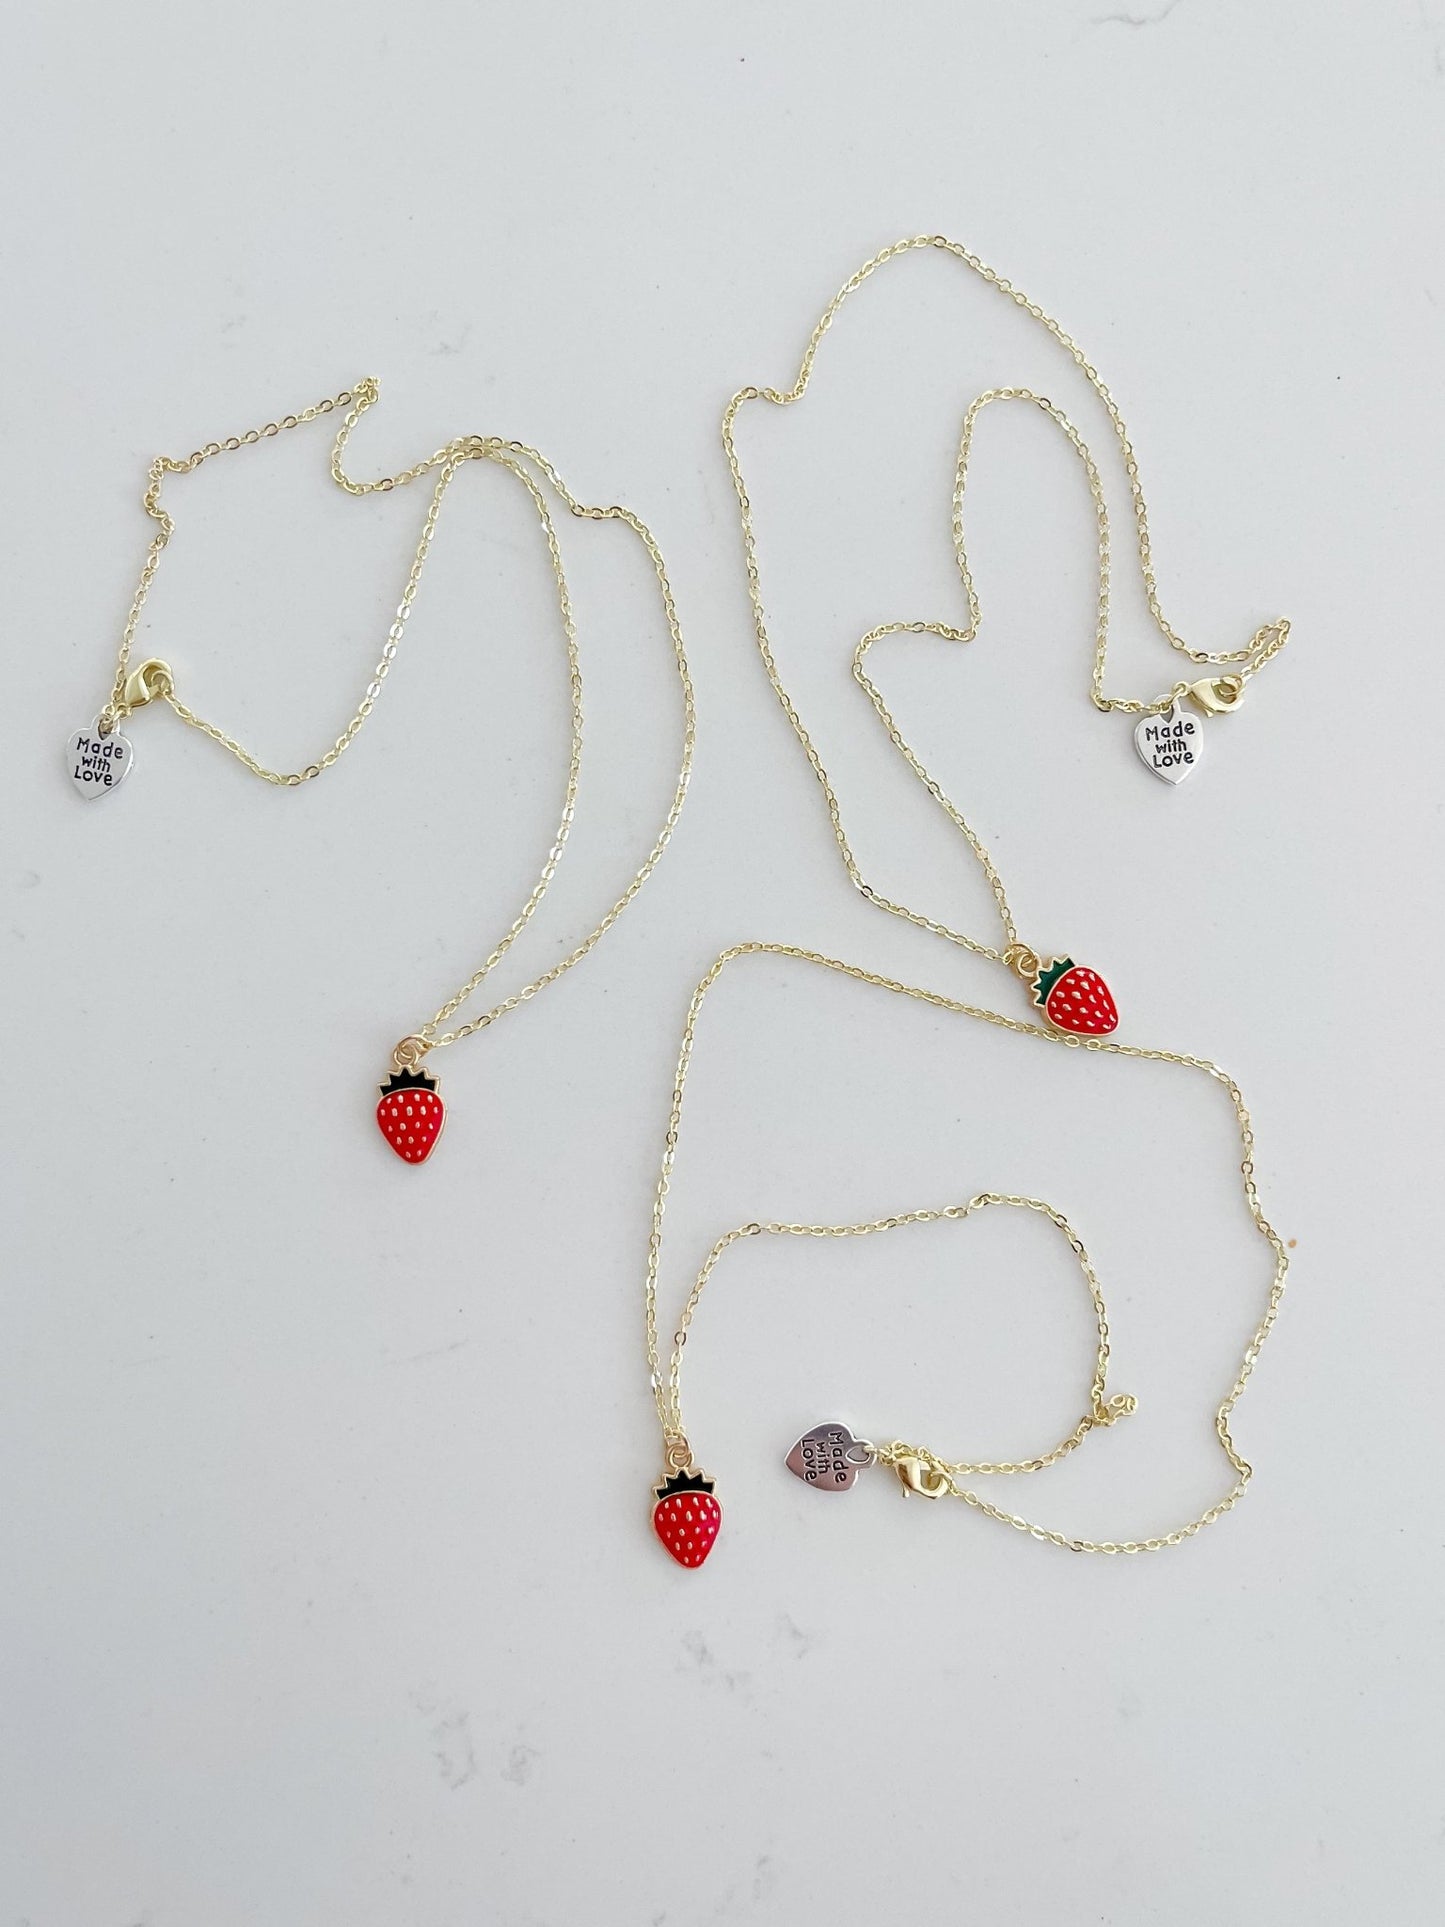 Berry Special Necklace - Designs by Lauren Ann